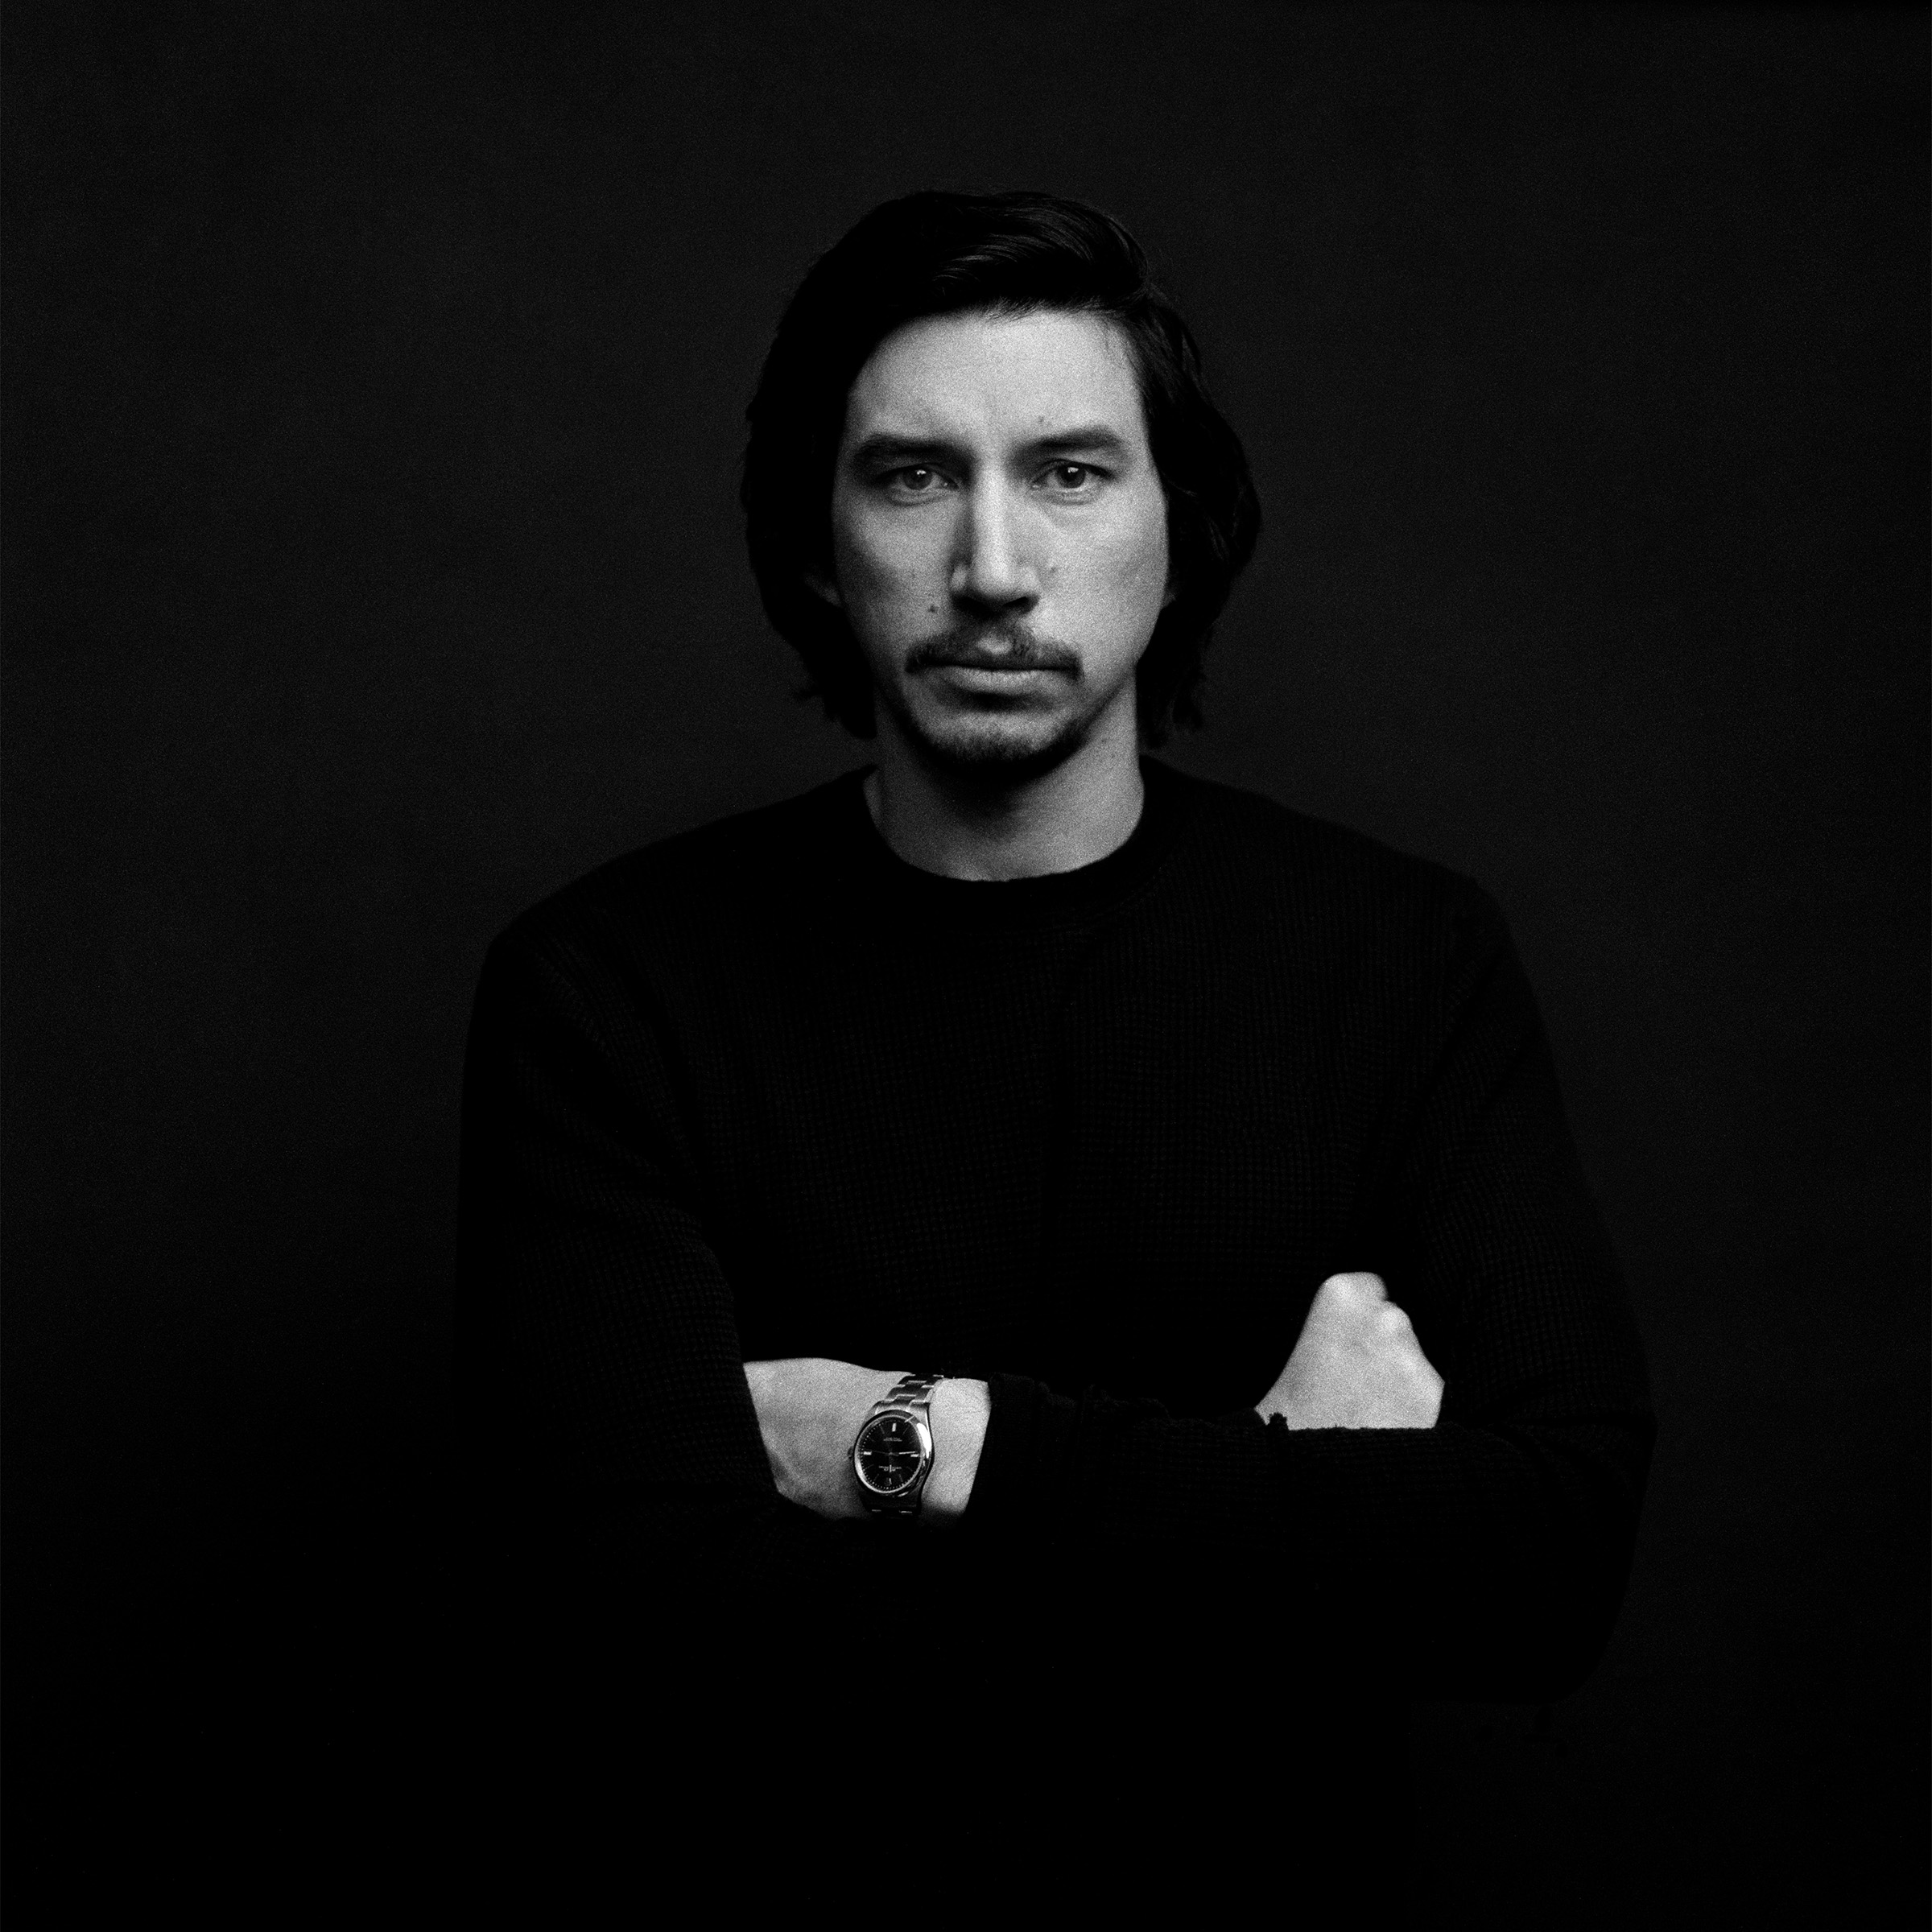 Adam Driver Entertainment Industry Photography Los Angeles - Shot by Jesse Dittmar